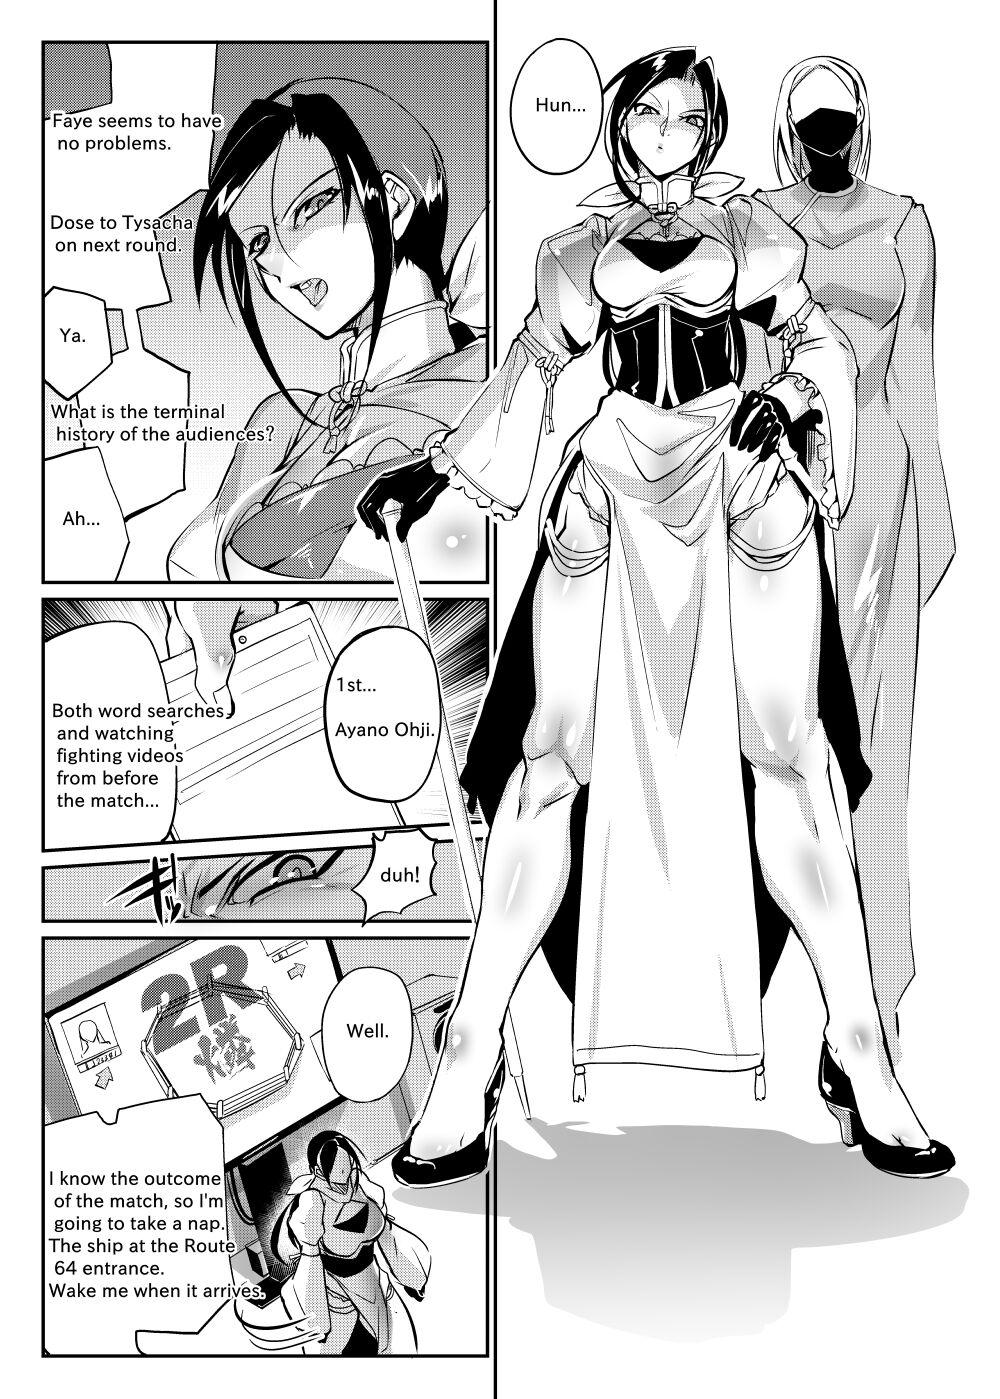 Old Vs Young Tougijou Rin - Arena Rin 5 - Original Dirty Talk - Page 6